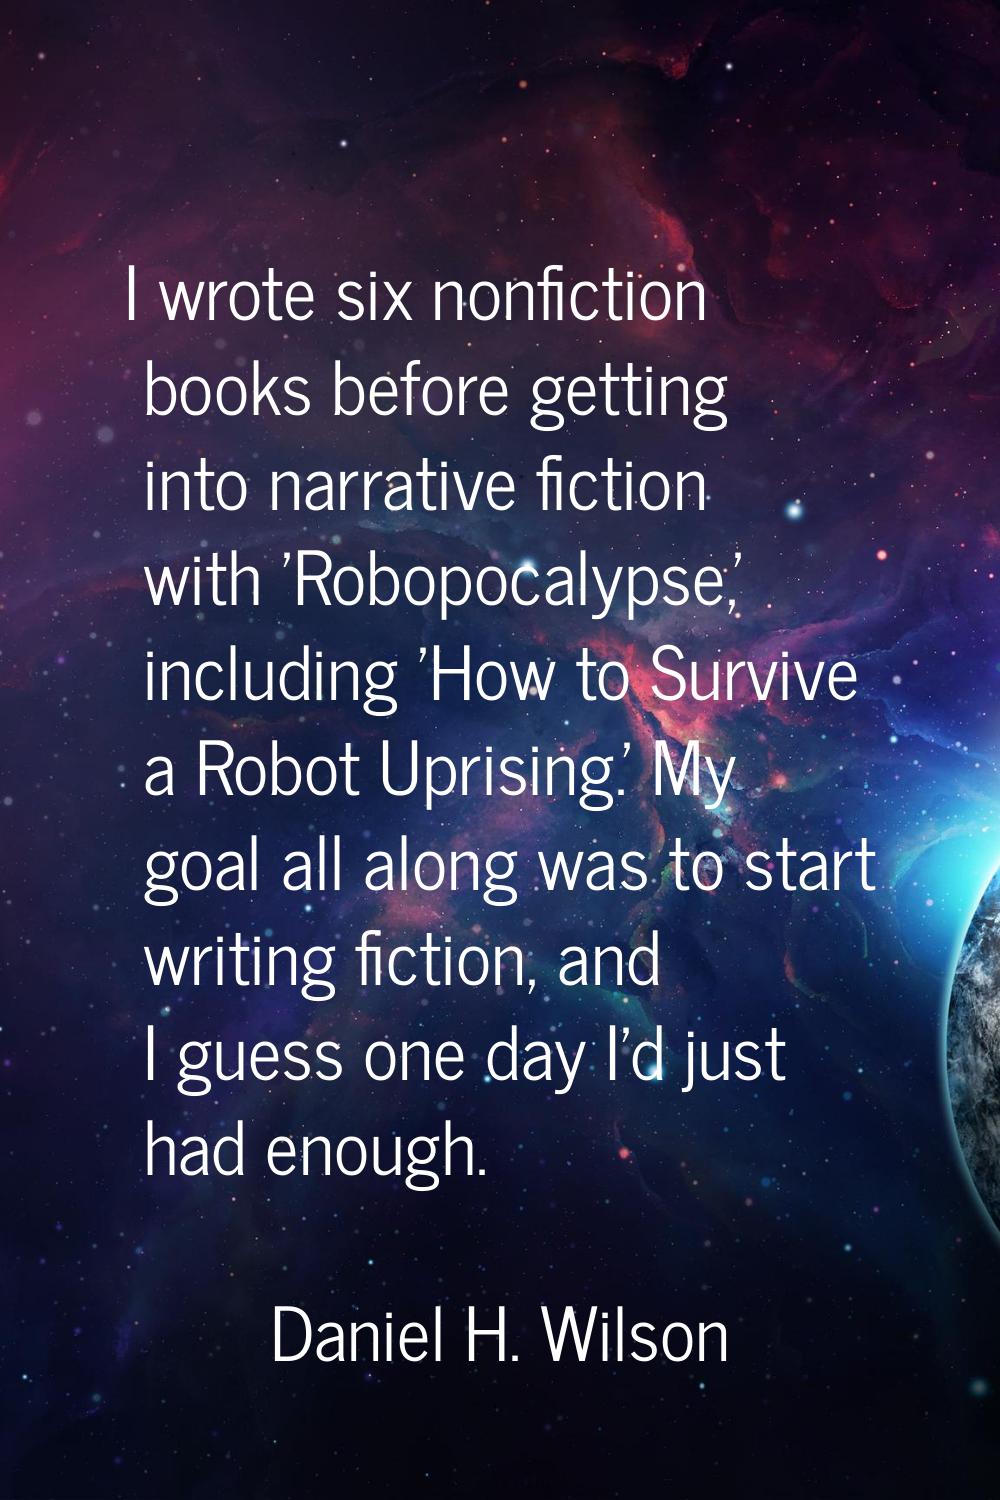 I wrote six nonfiction books before getting into narrative fiction with 'Robopocalypse,' including 